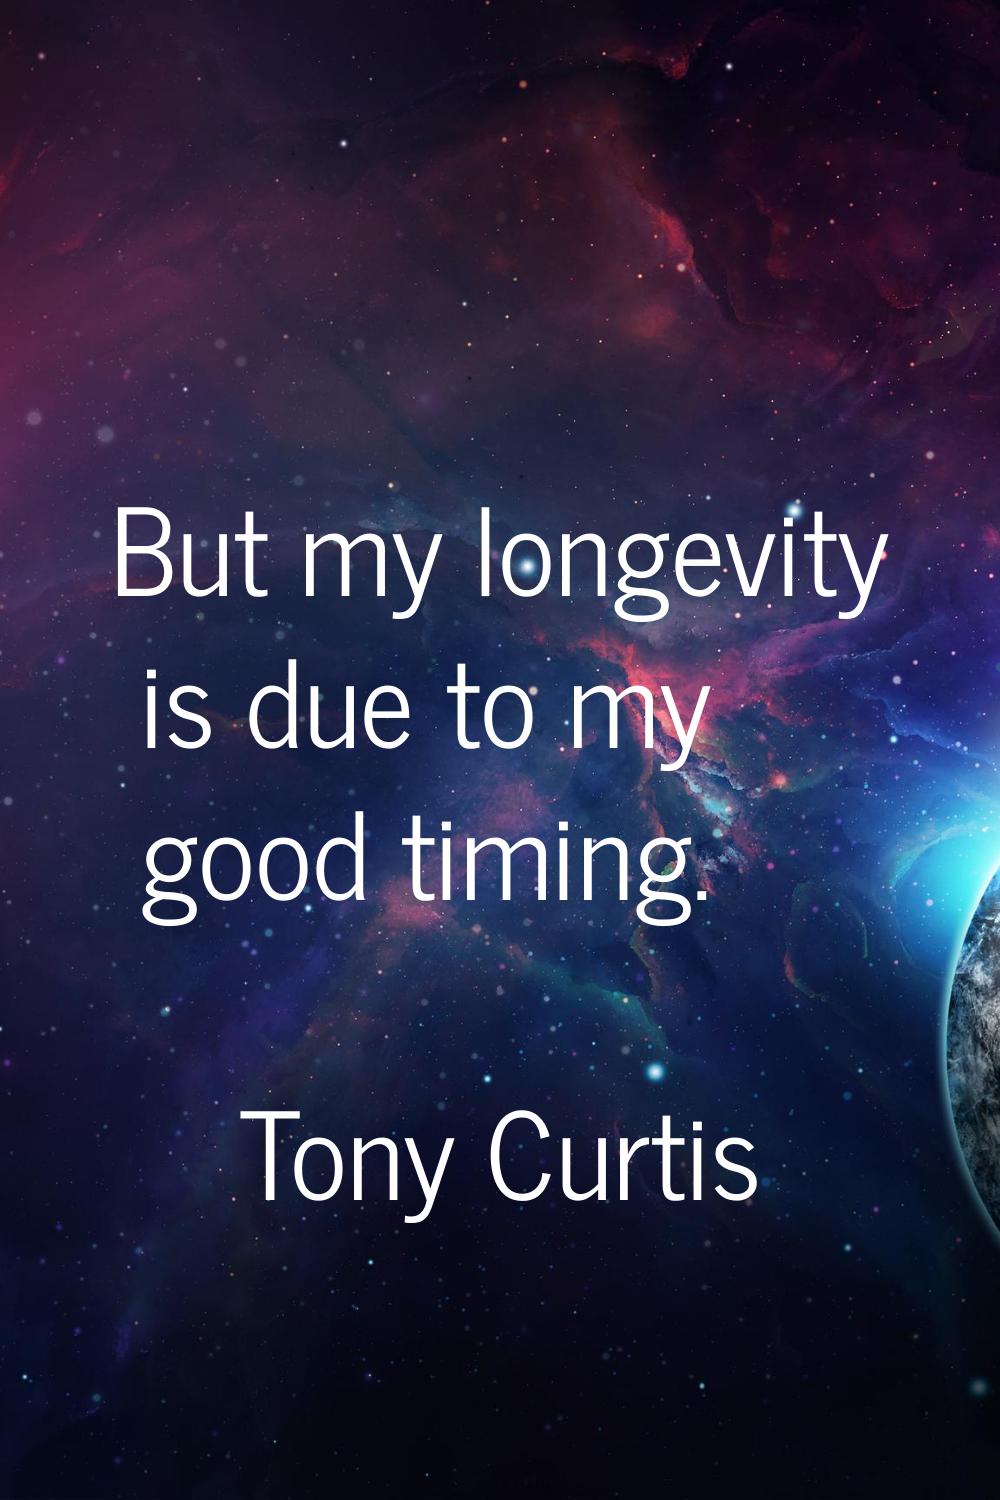 But my longevity is due to my good timing.